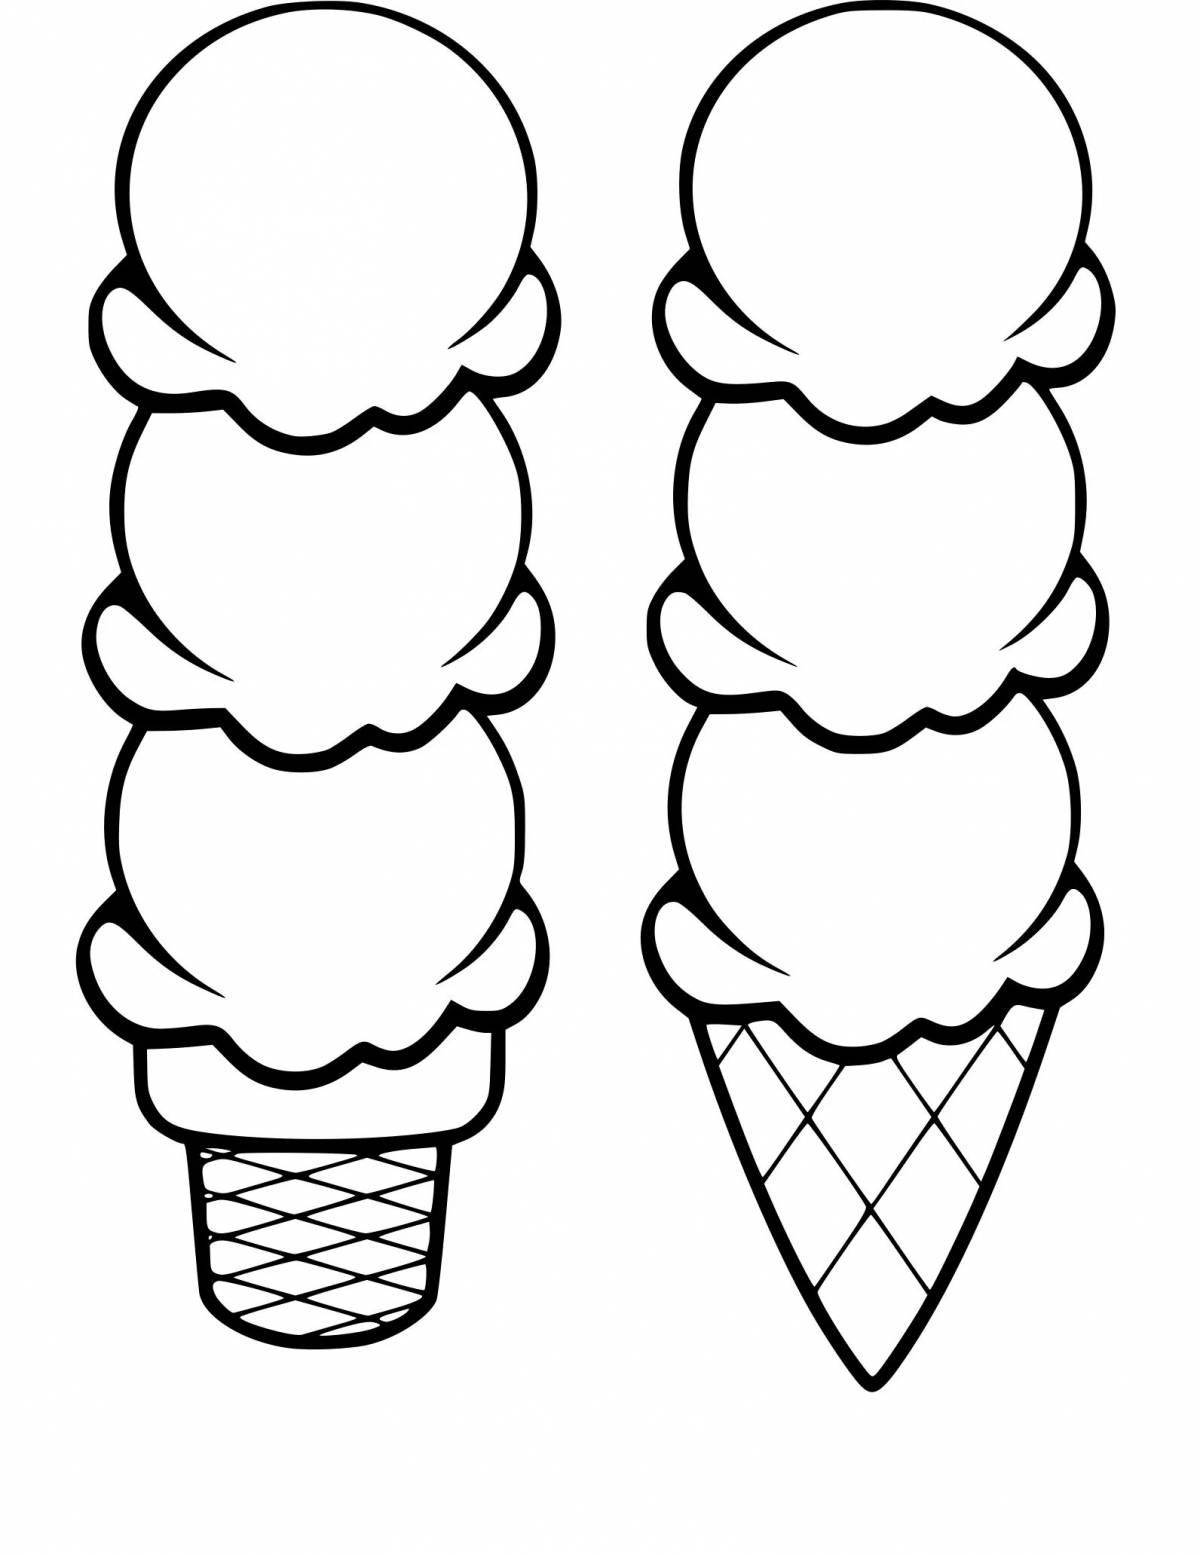 Funky ice cream coloring page for kids